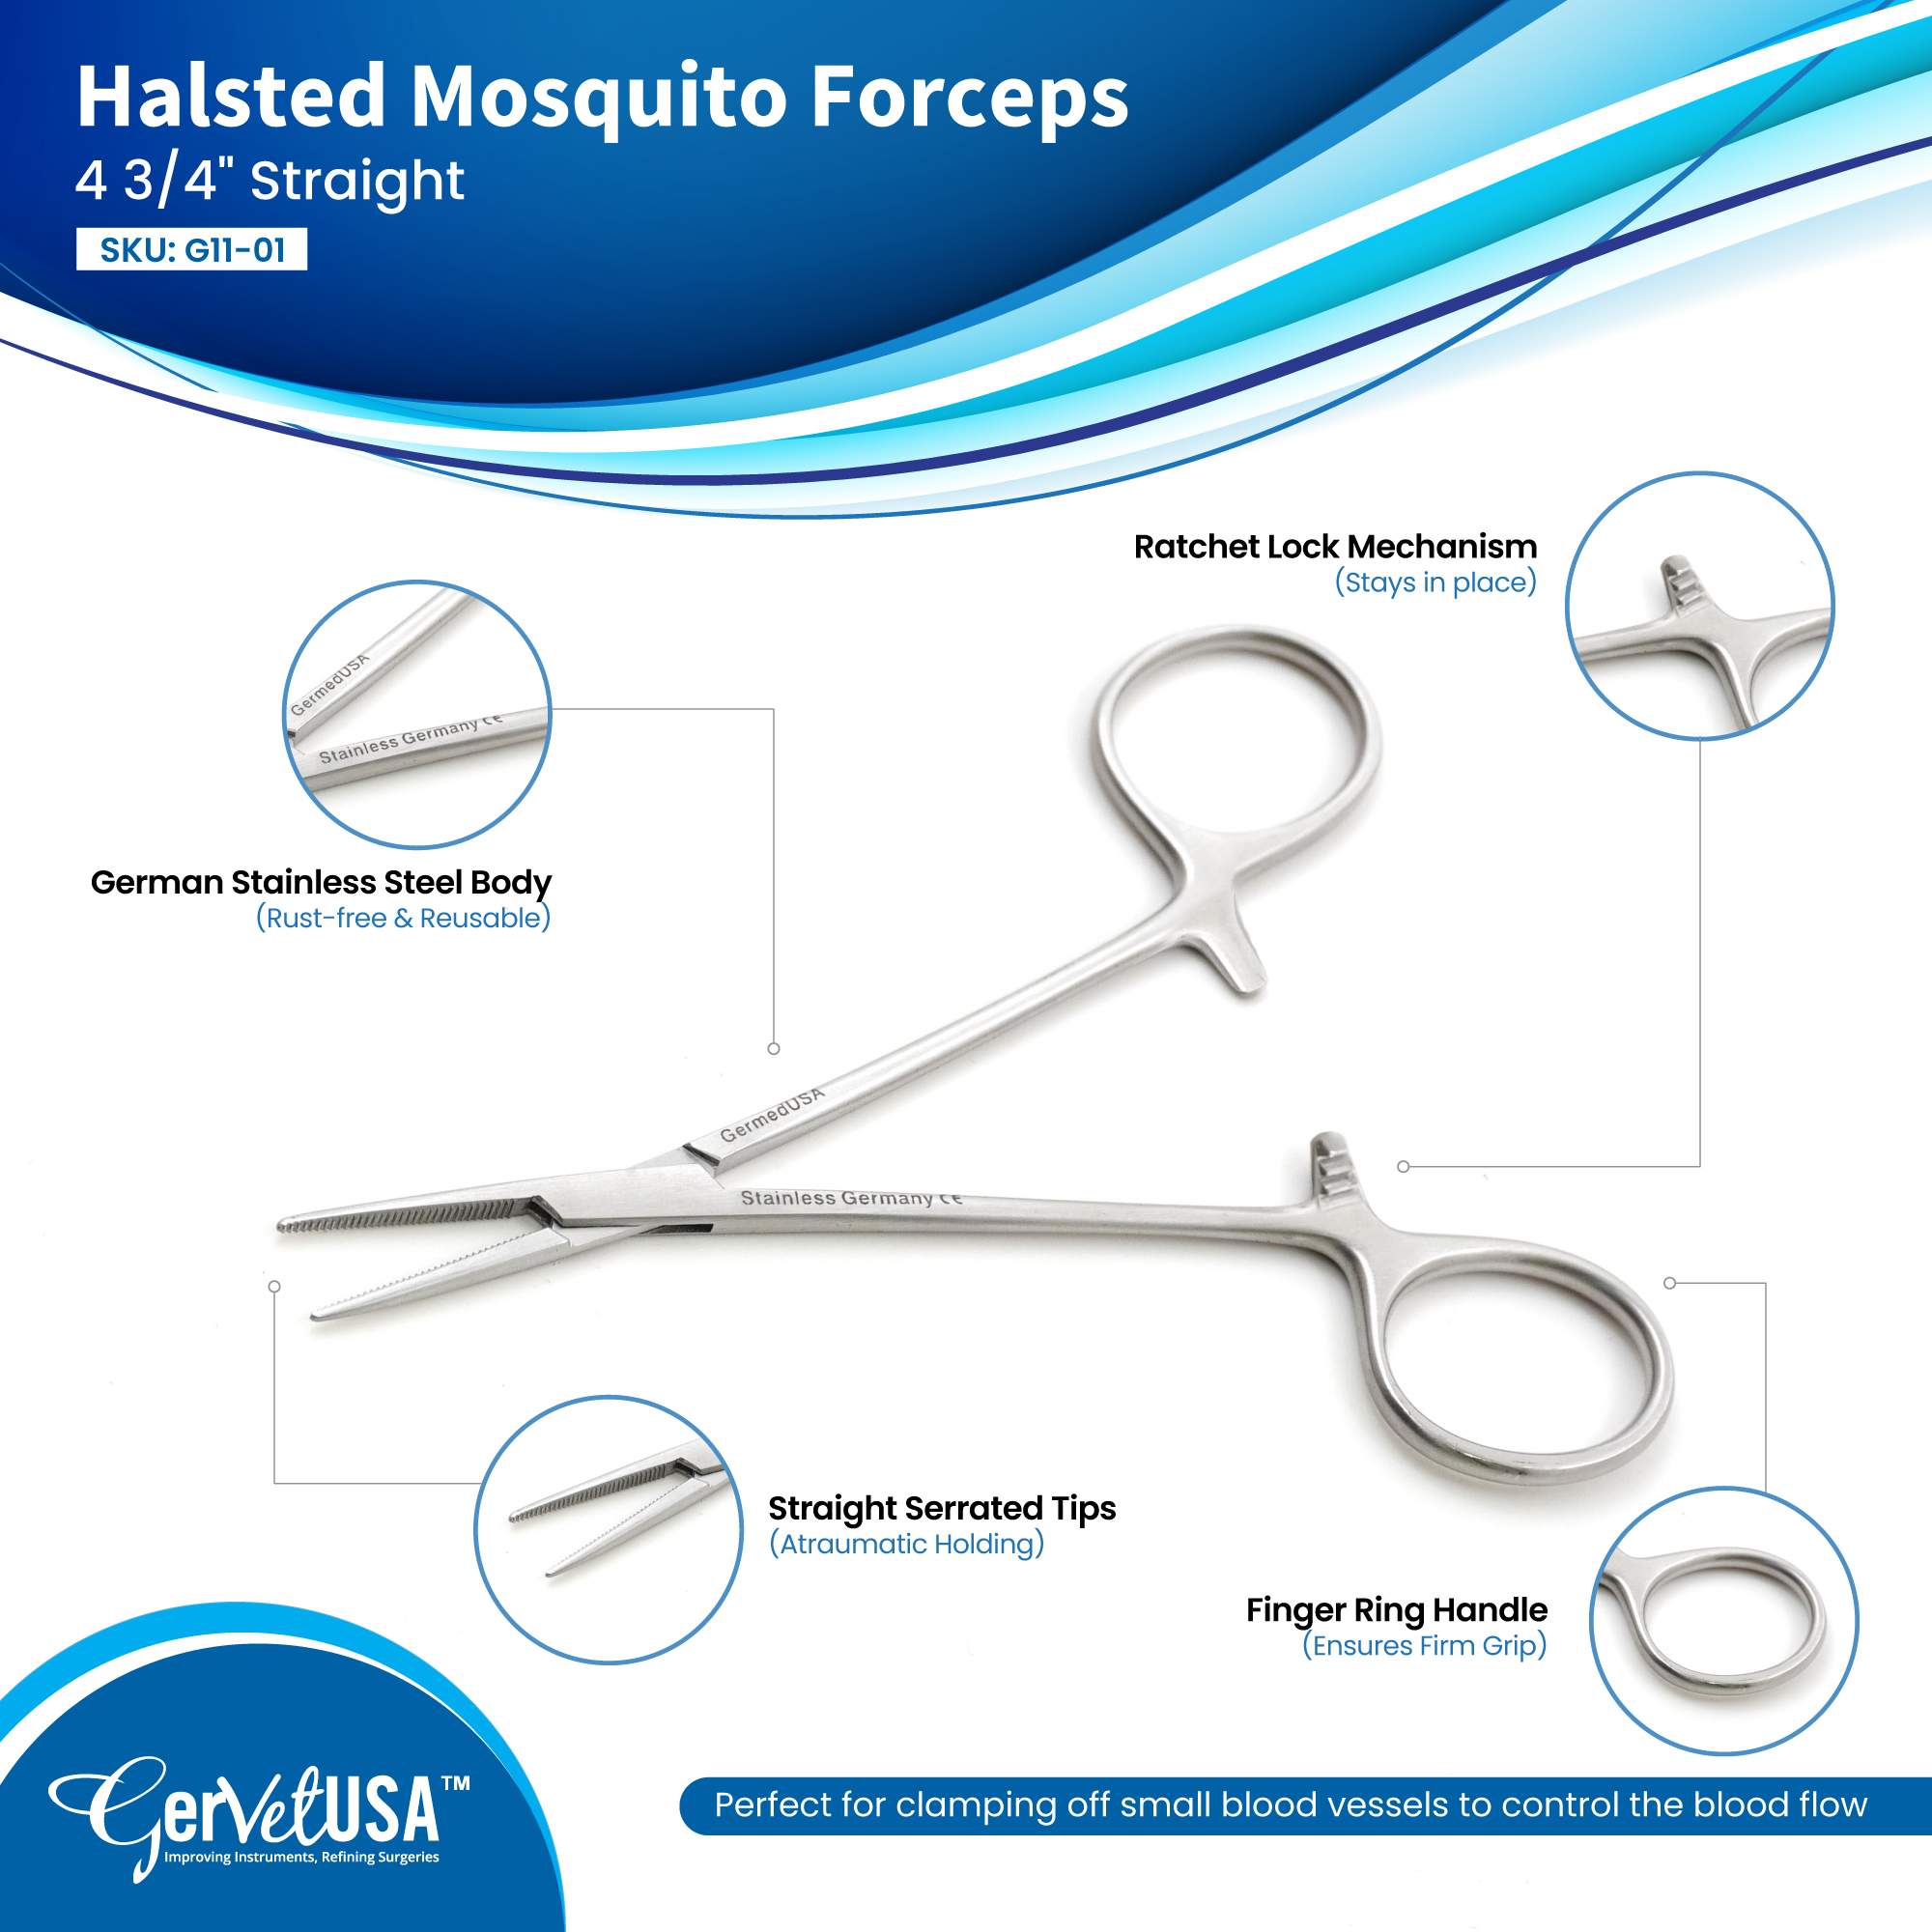 Halsted Mosquito Forceps 4 3/4" Straight